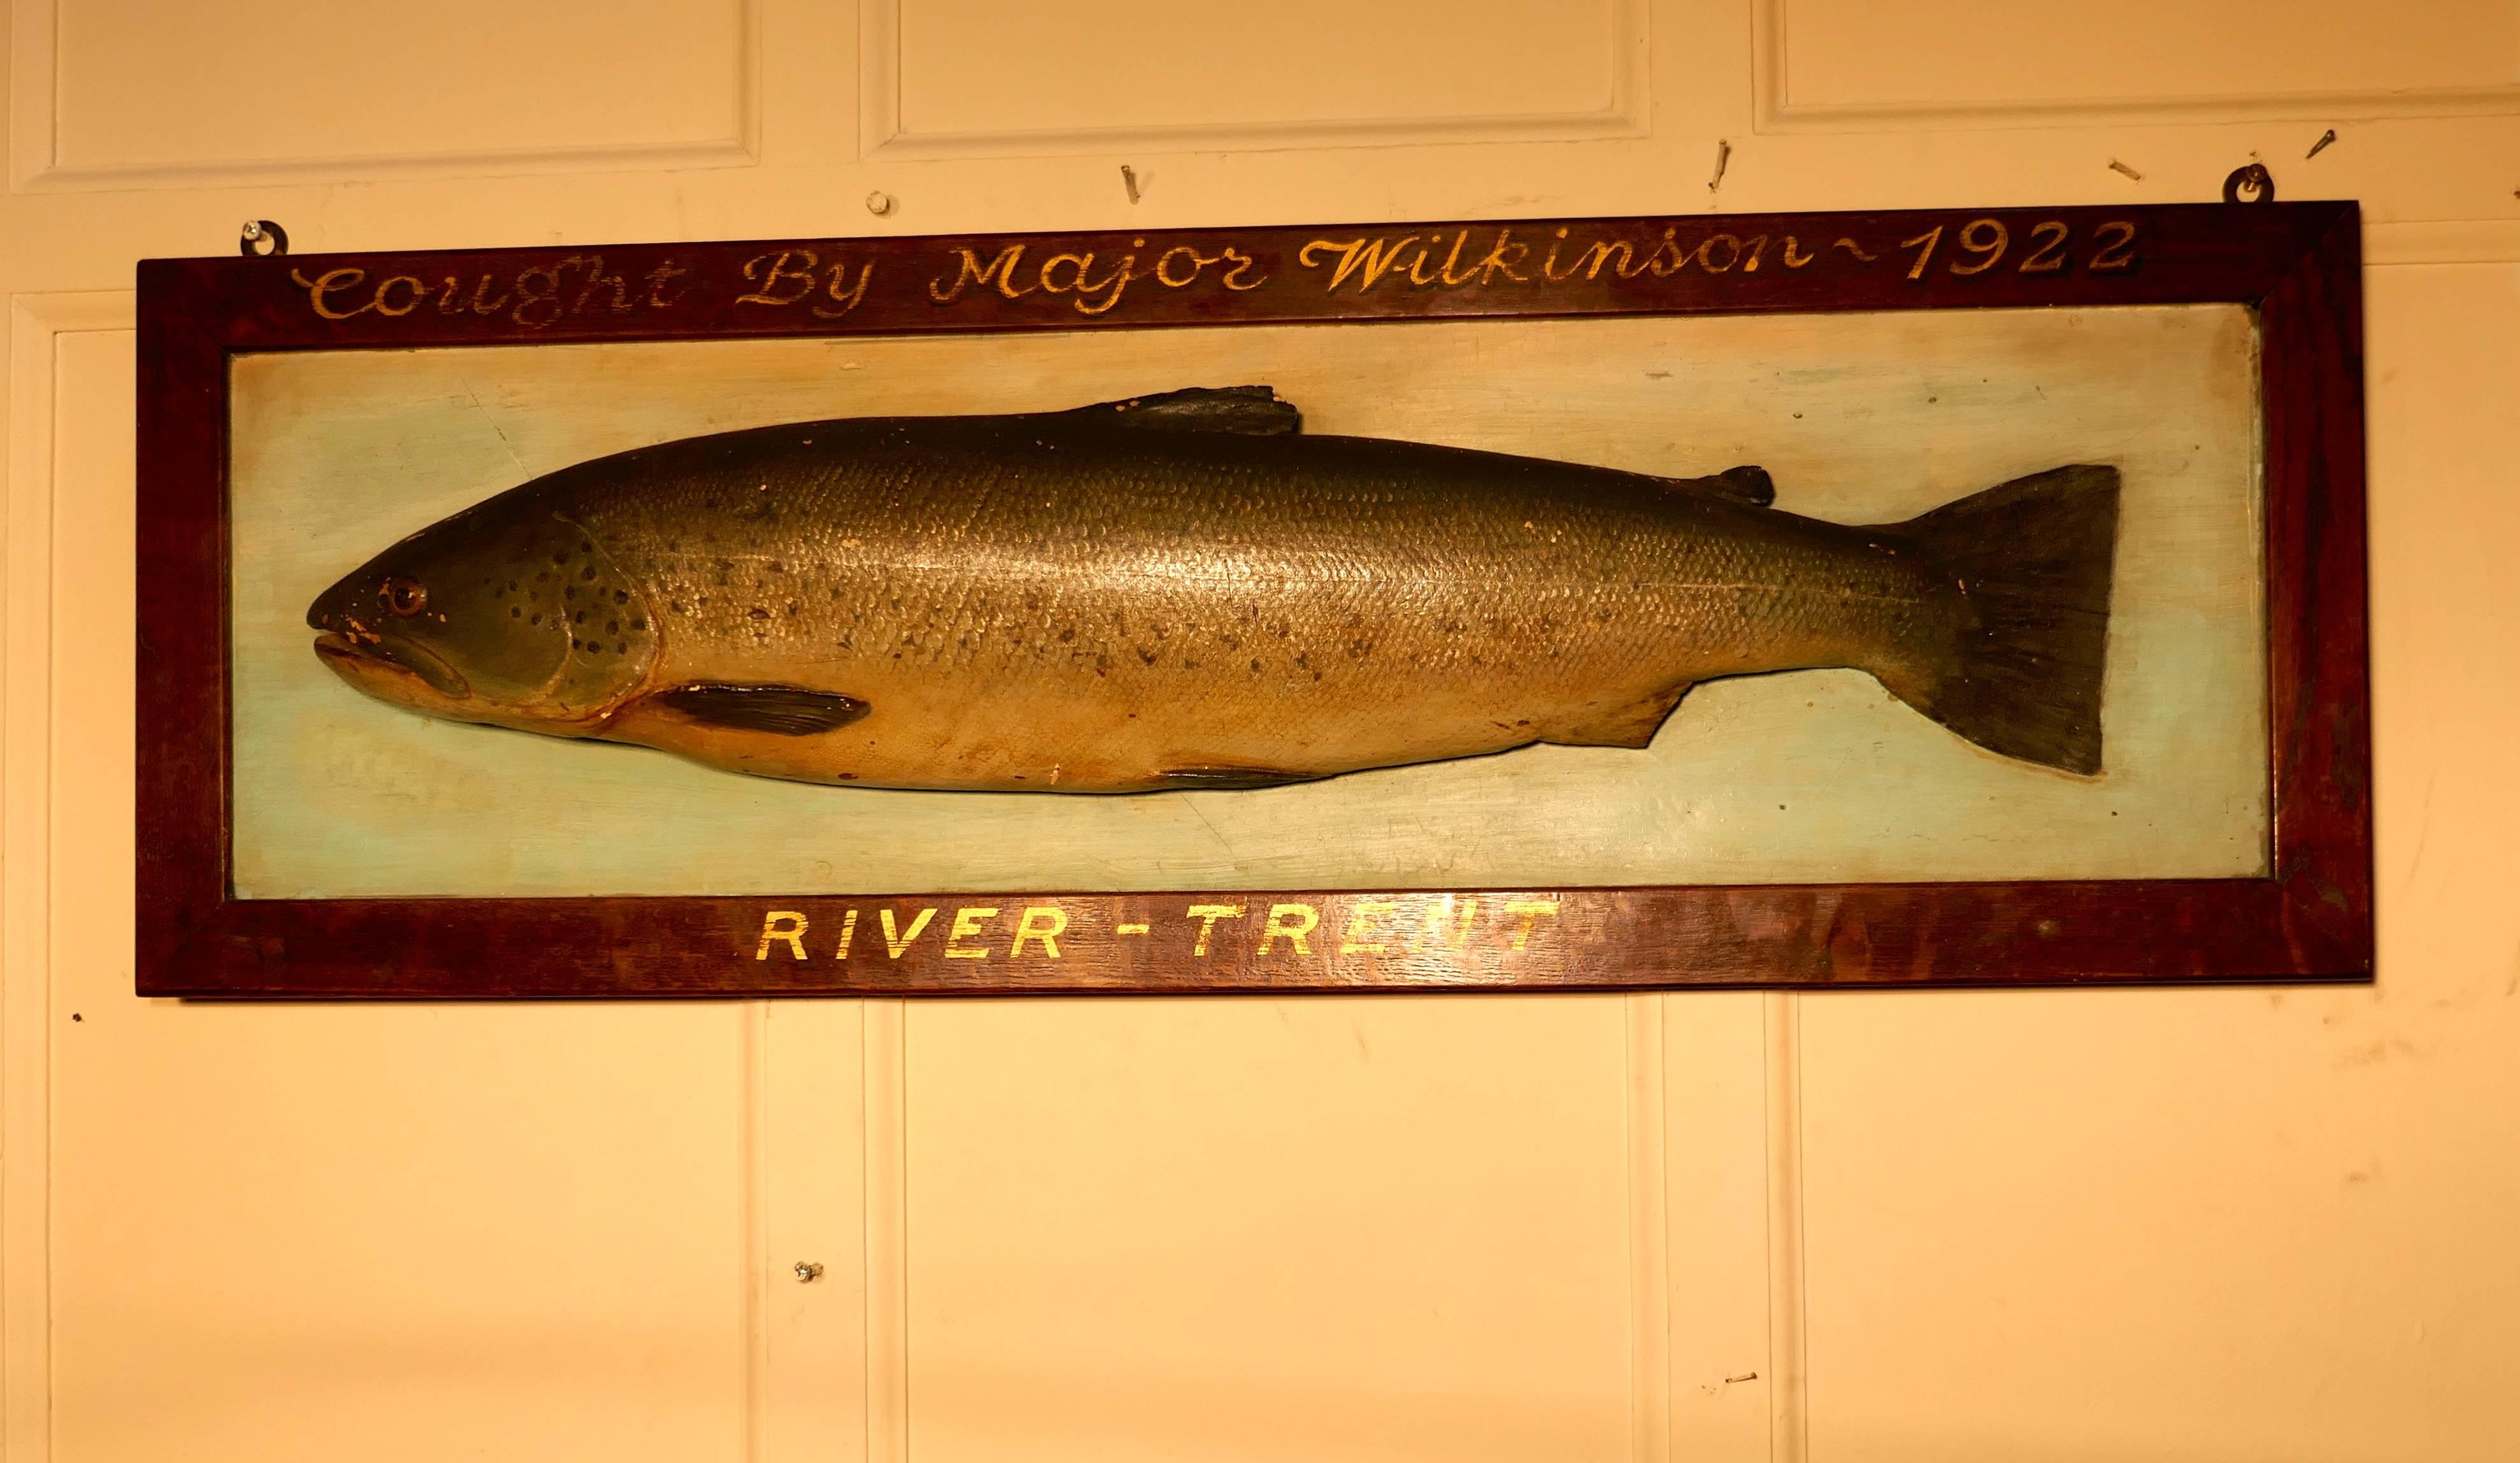 Mounted taxidermy of a trout from the river Trent, 1922

This is a mounted taxidermy of a trout from the river Trent 1922, the fish was caught by Major Wilkinson. This is a fine large specimen and is superbly stuffed and mounted, it is set on wood